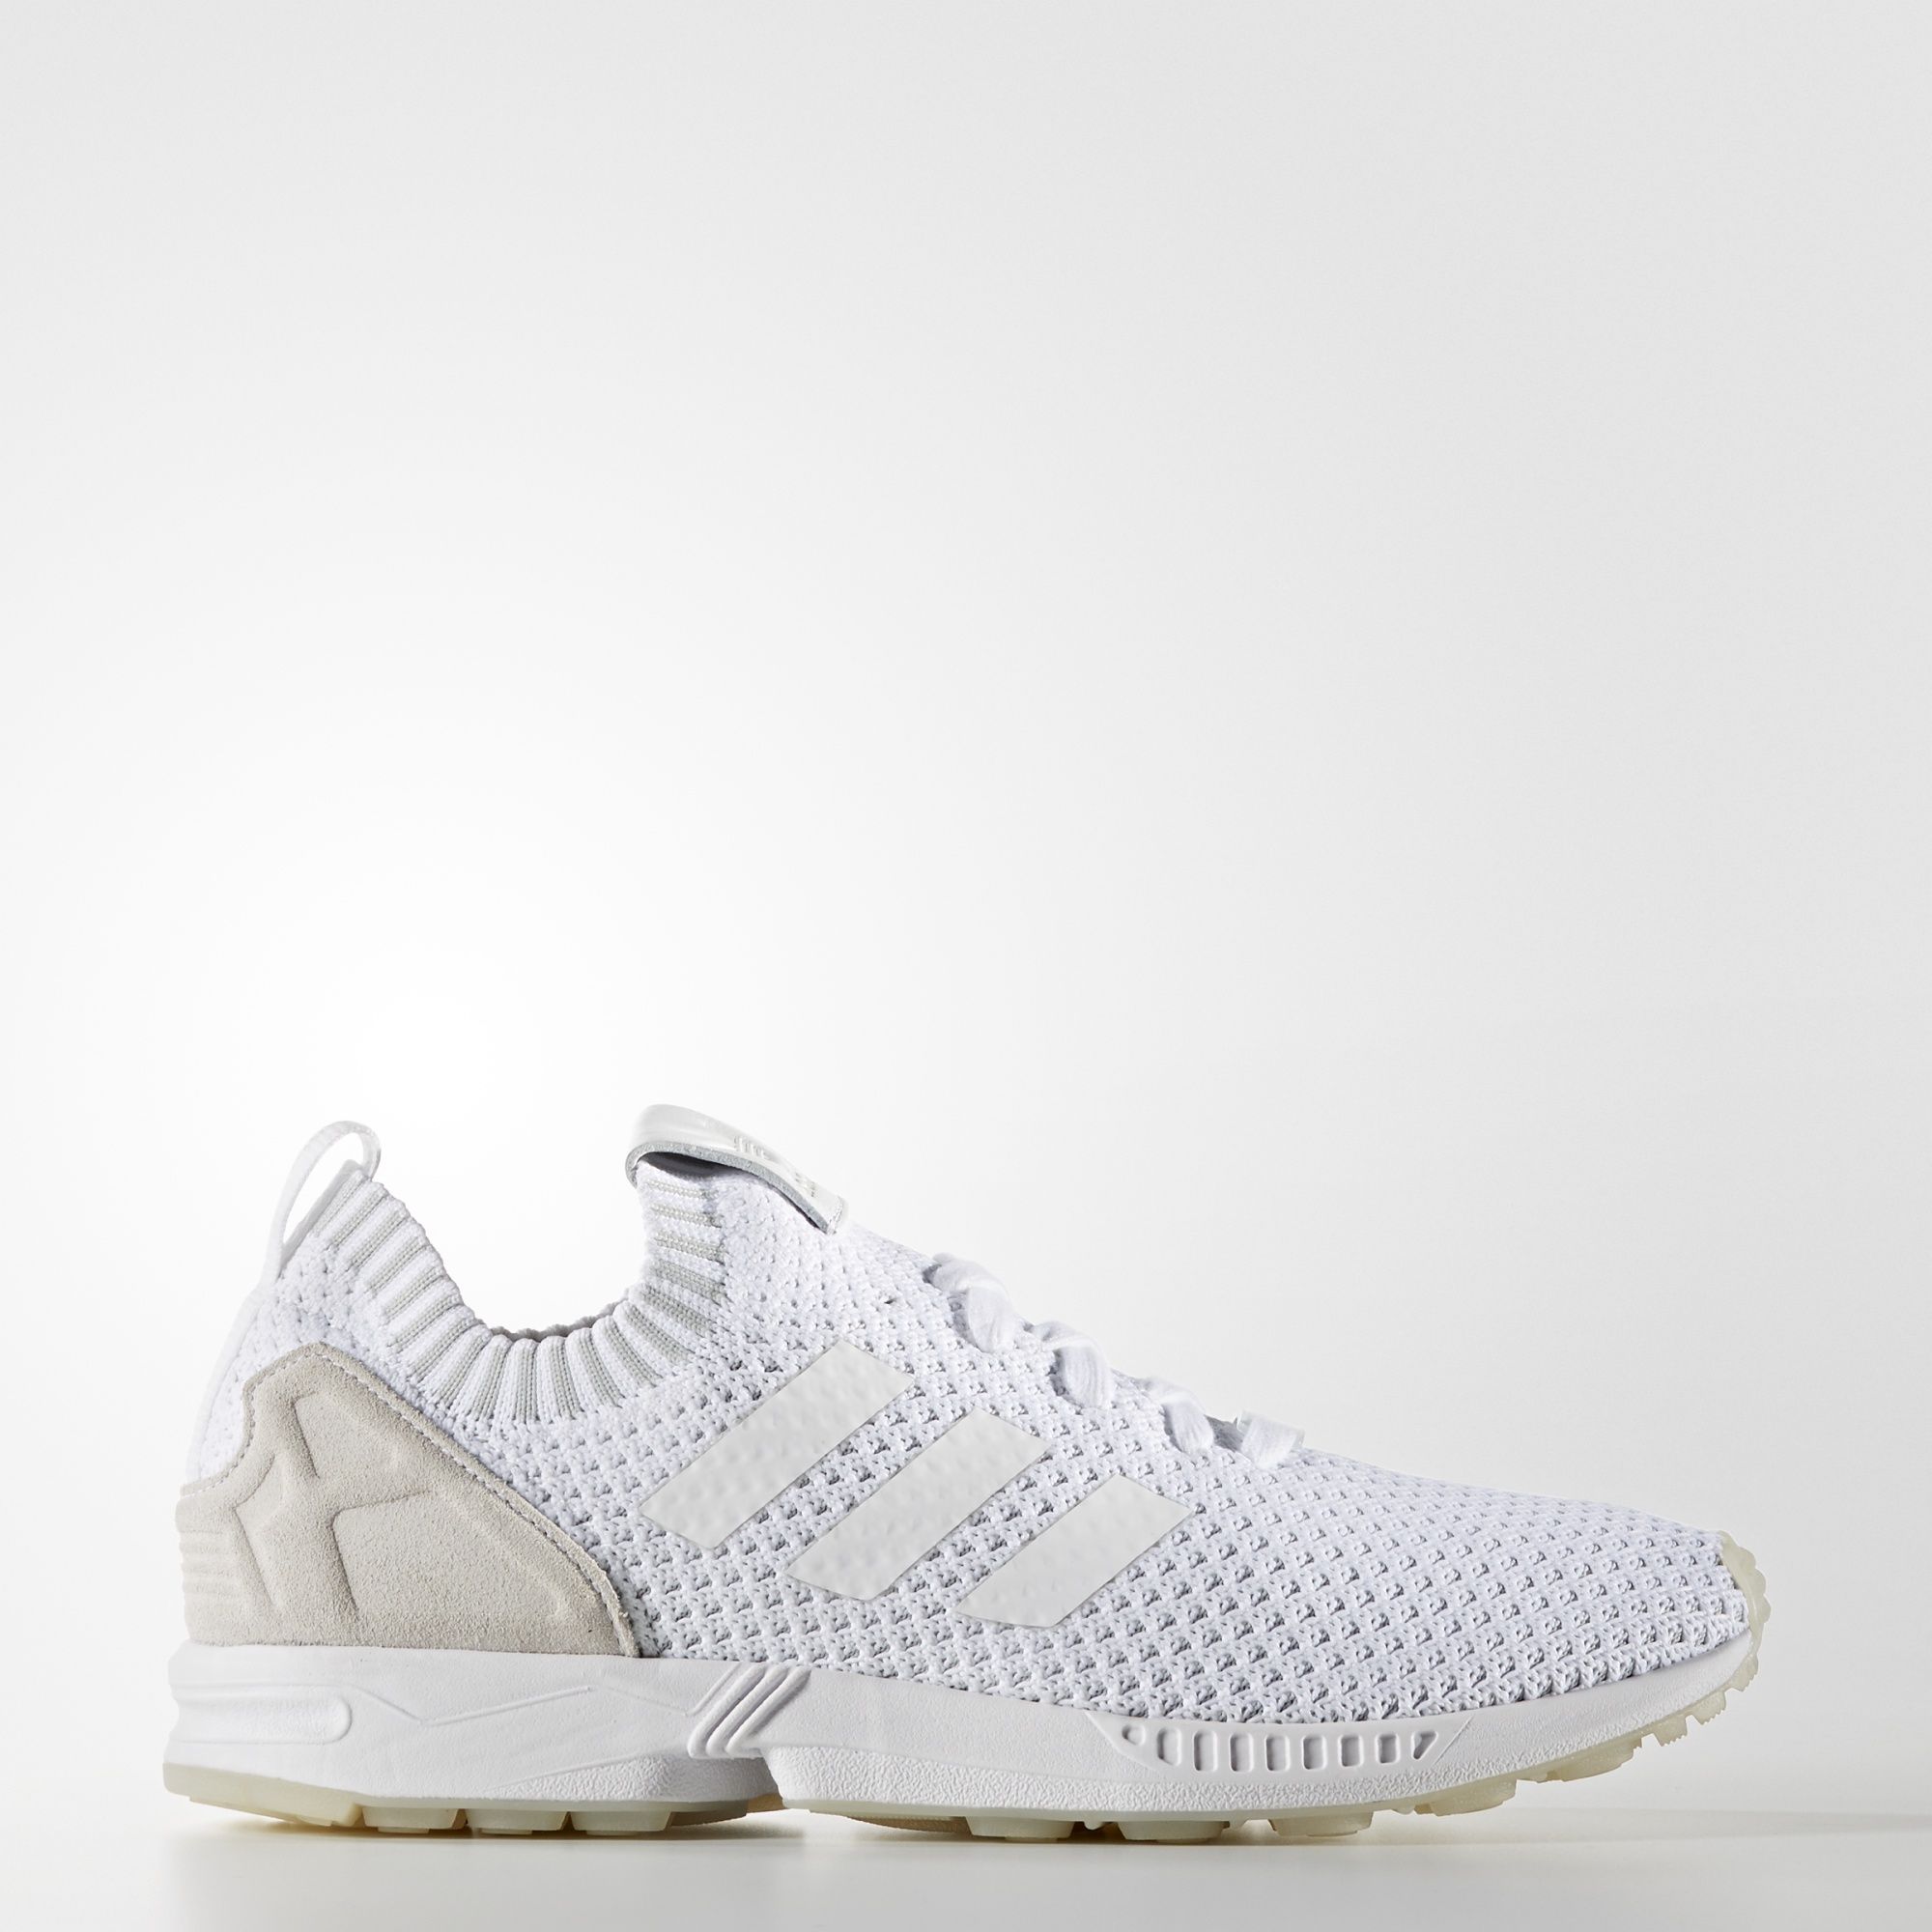 The adidas ZX Flux Gets a Primeknit Makeover-8